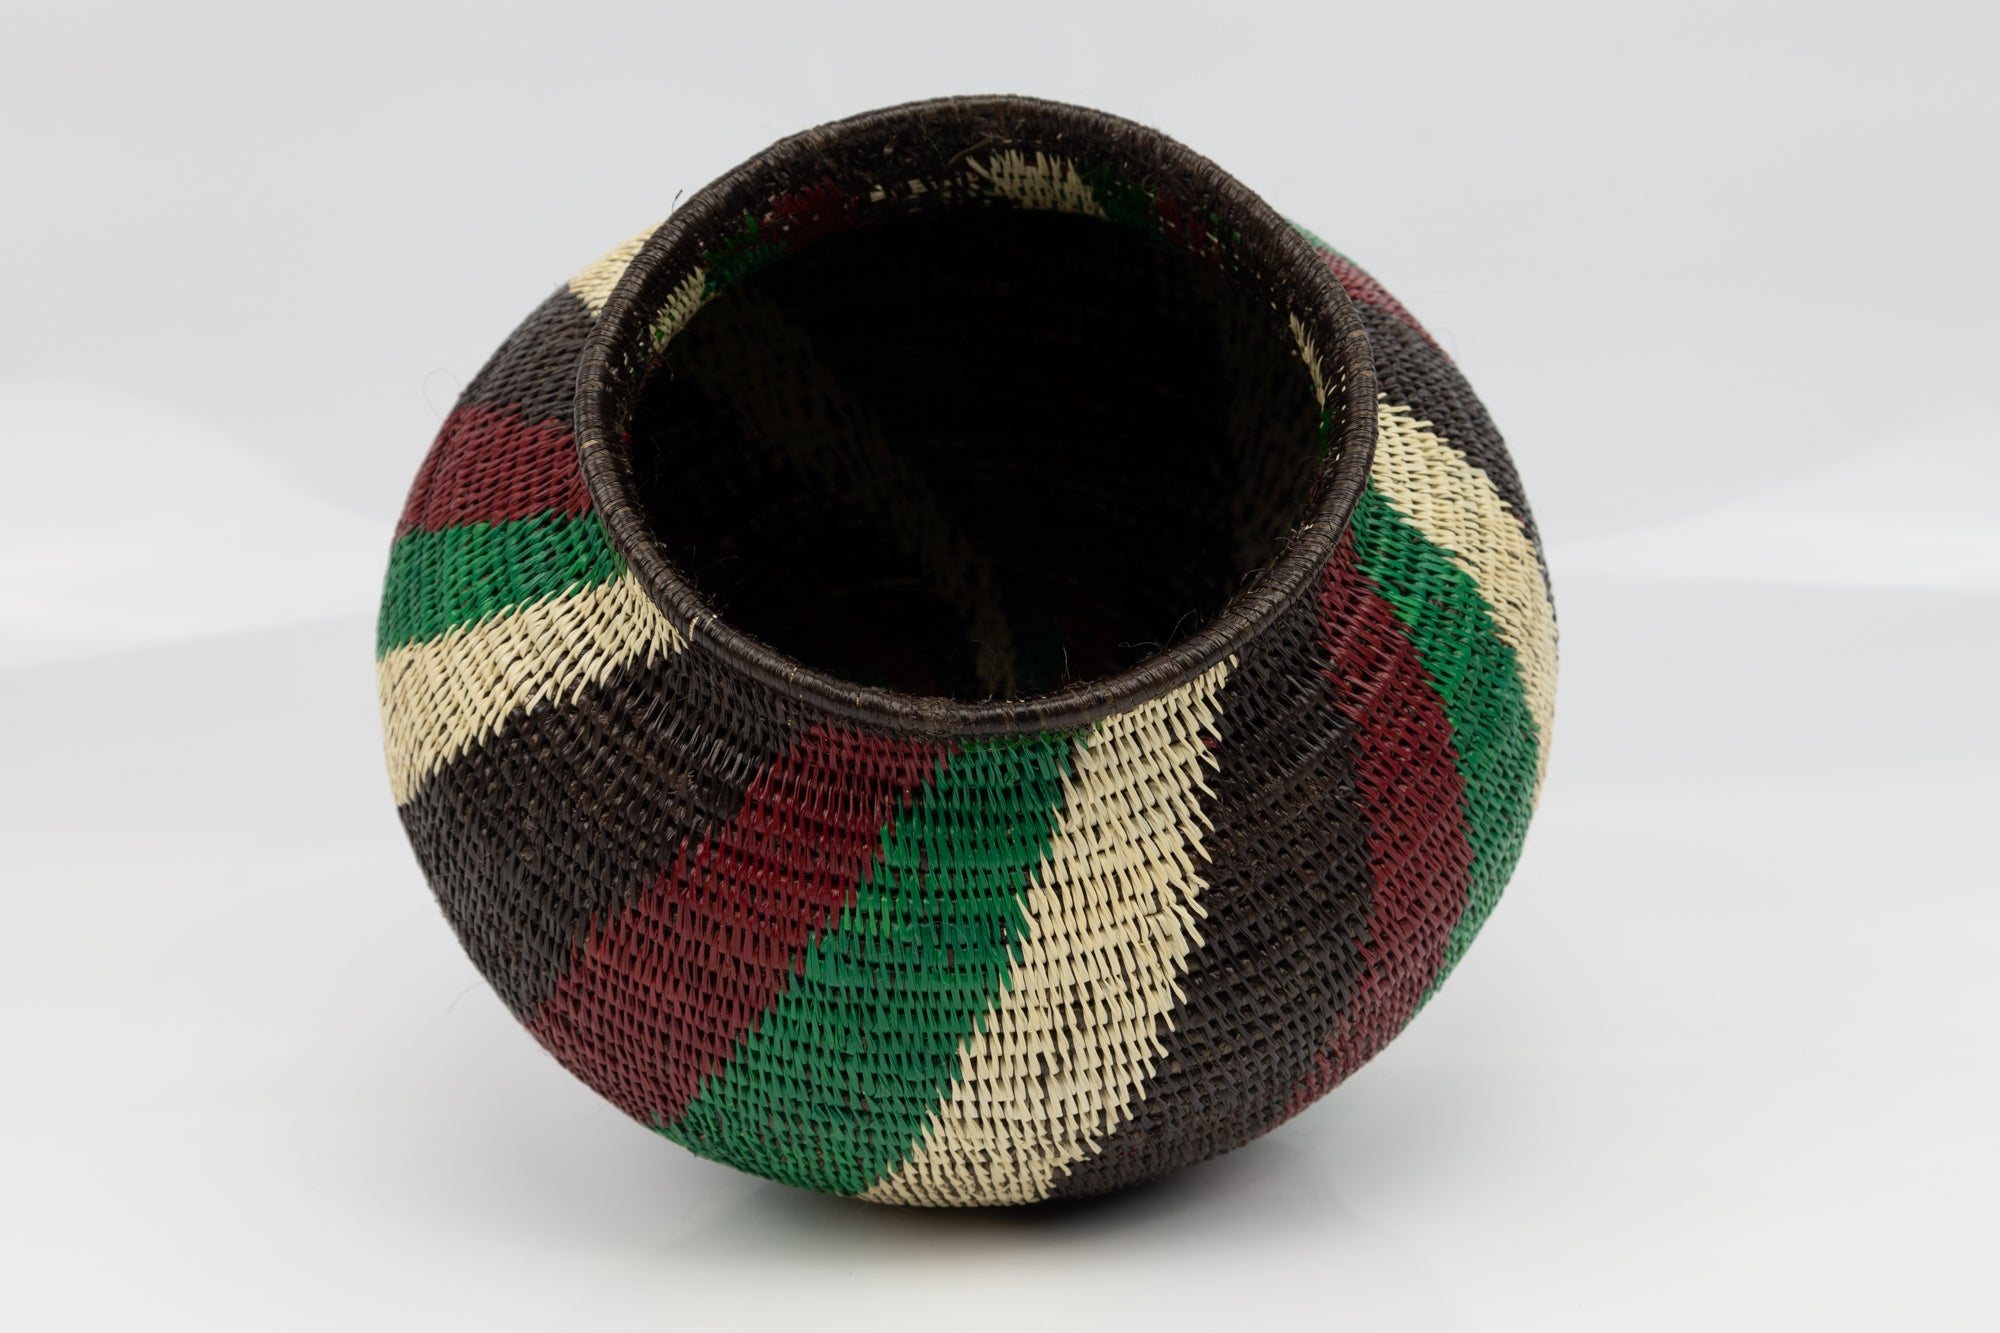 Black Red and Green Woven Basket